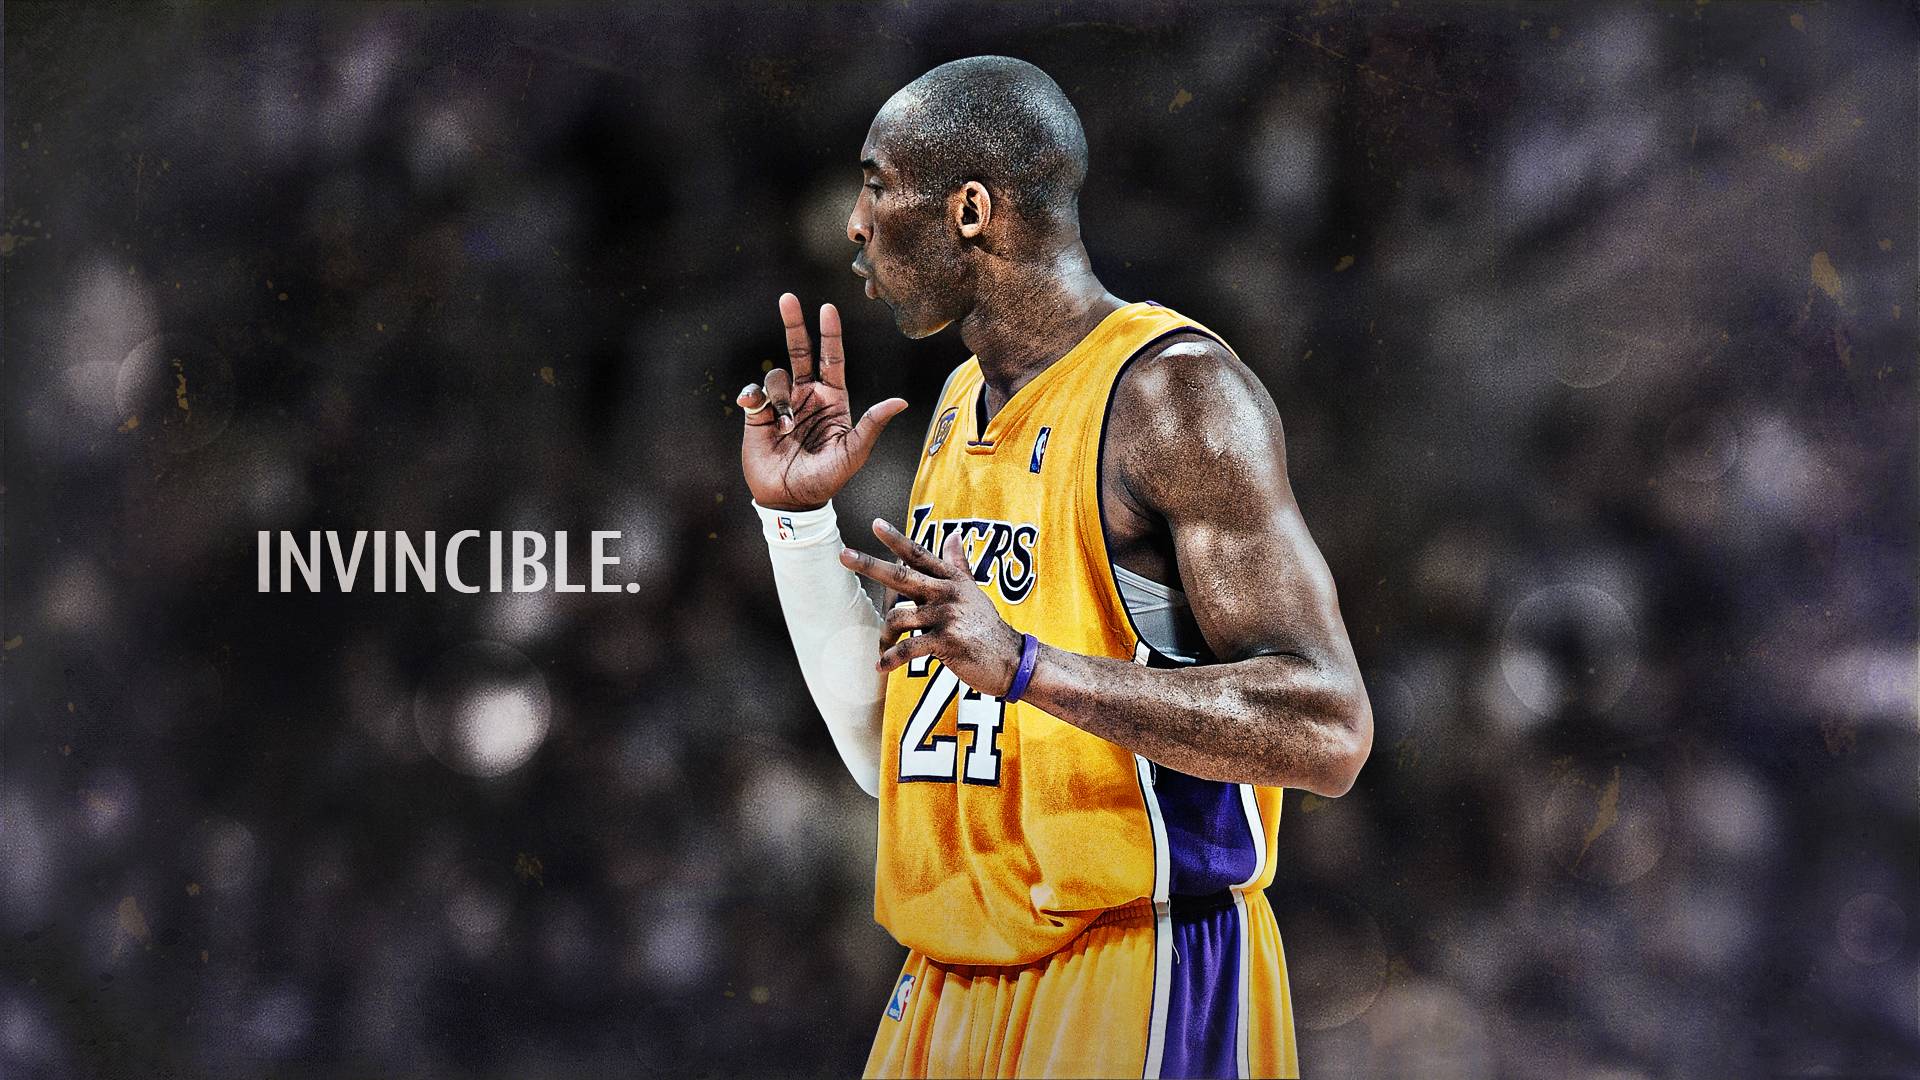 Kobe Bryant Cool Wallpapers for Phone, Background Wallpapers - HeroScreen